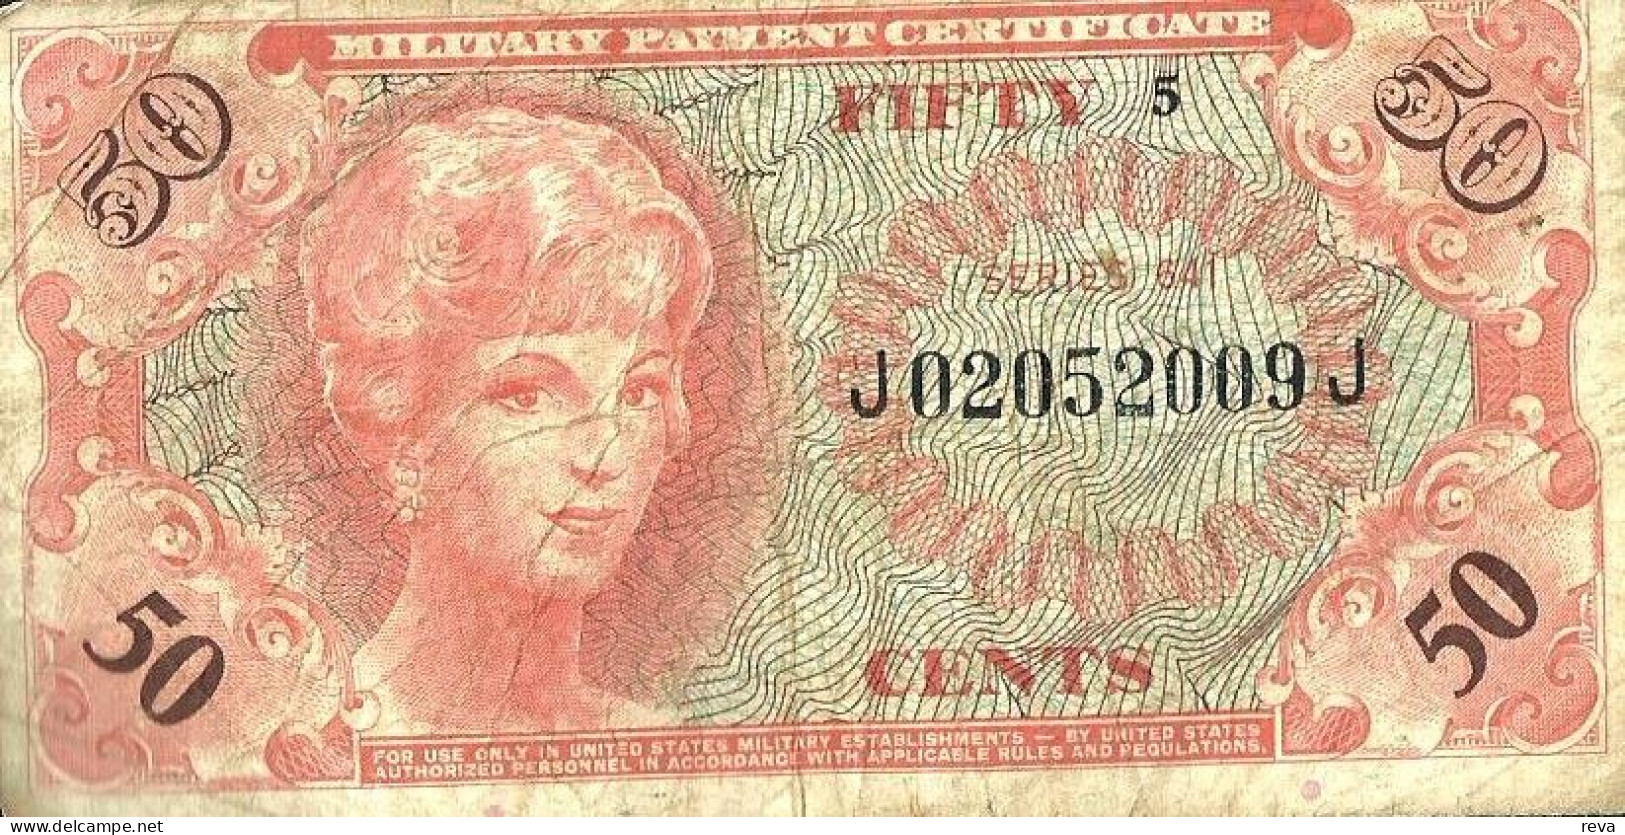 USA UNITED STATES 50 CENTS MILITARY CERTIFICATE RED WOMAN SERIES 641 VF ND(1965-68) PM60a READ DESCRIPTION CAREFULLY !! - 1965-1968 - Serie 641